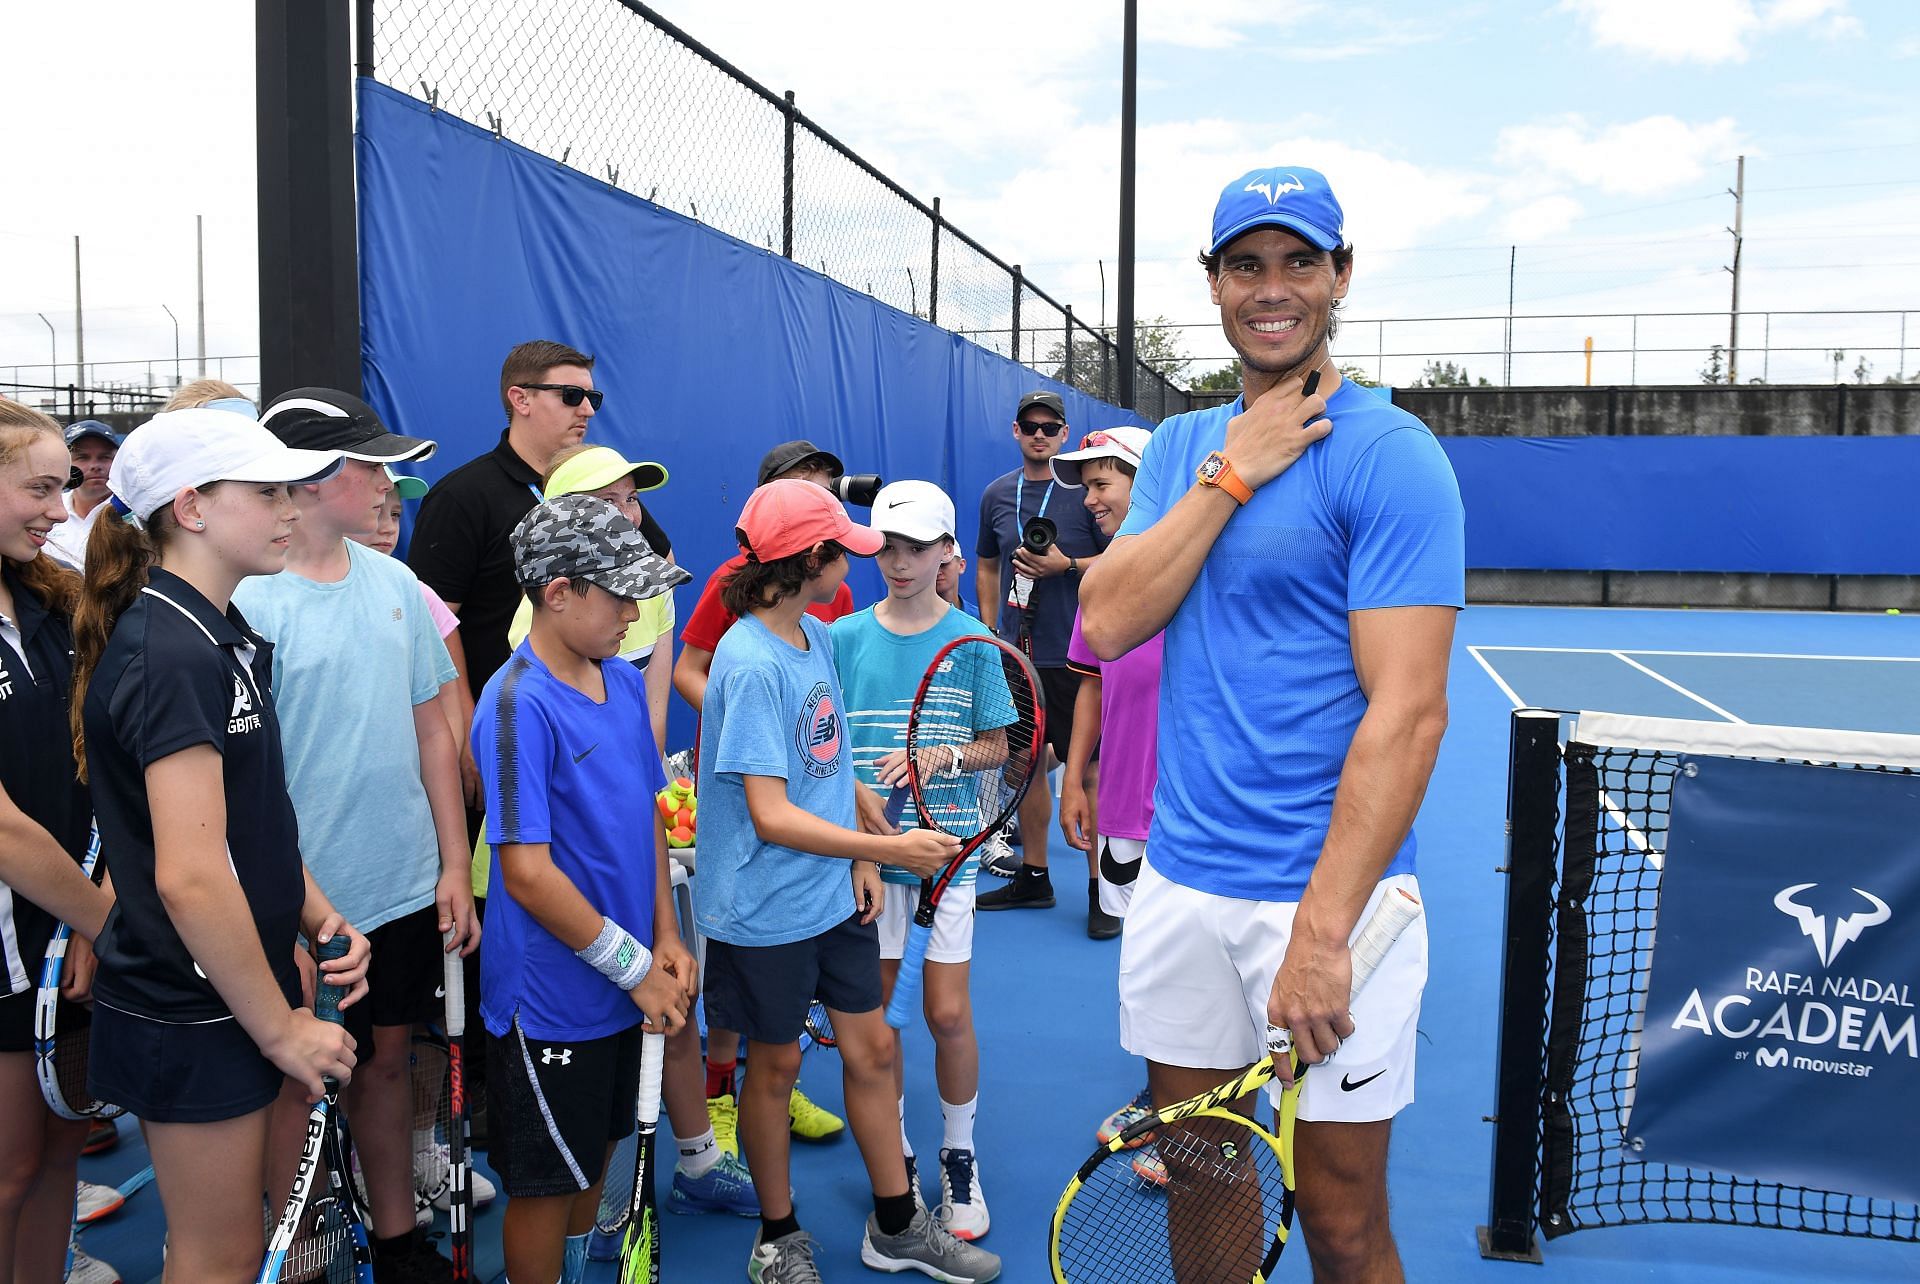 Rafael Nadal meets young tennis players chosen for his academy during the 2019 Brisbane International